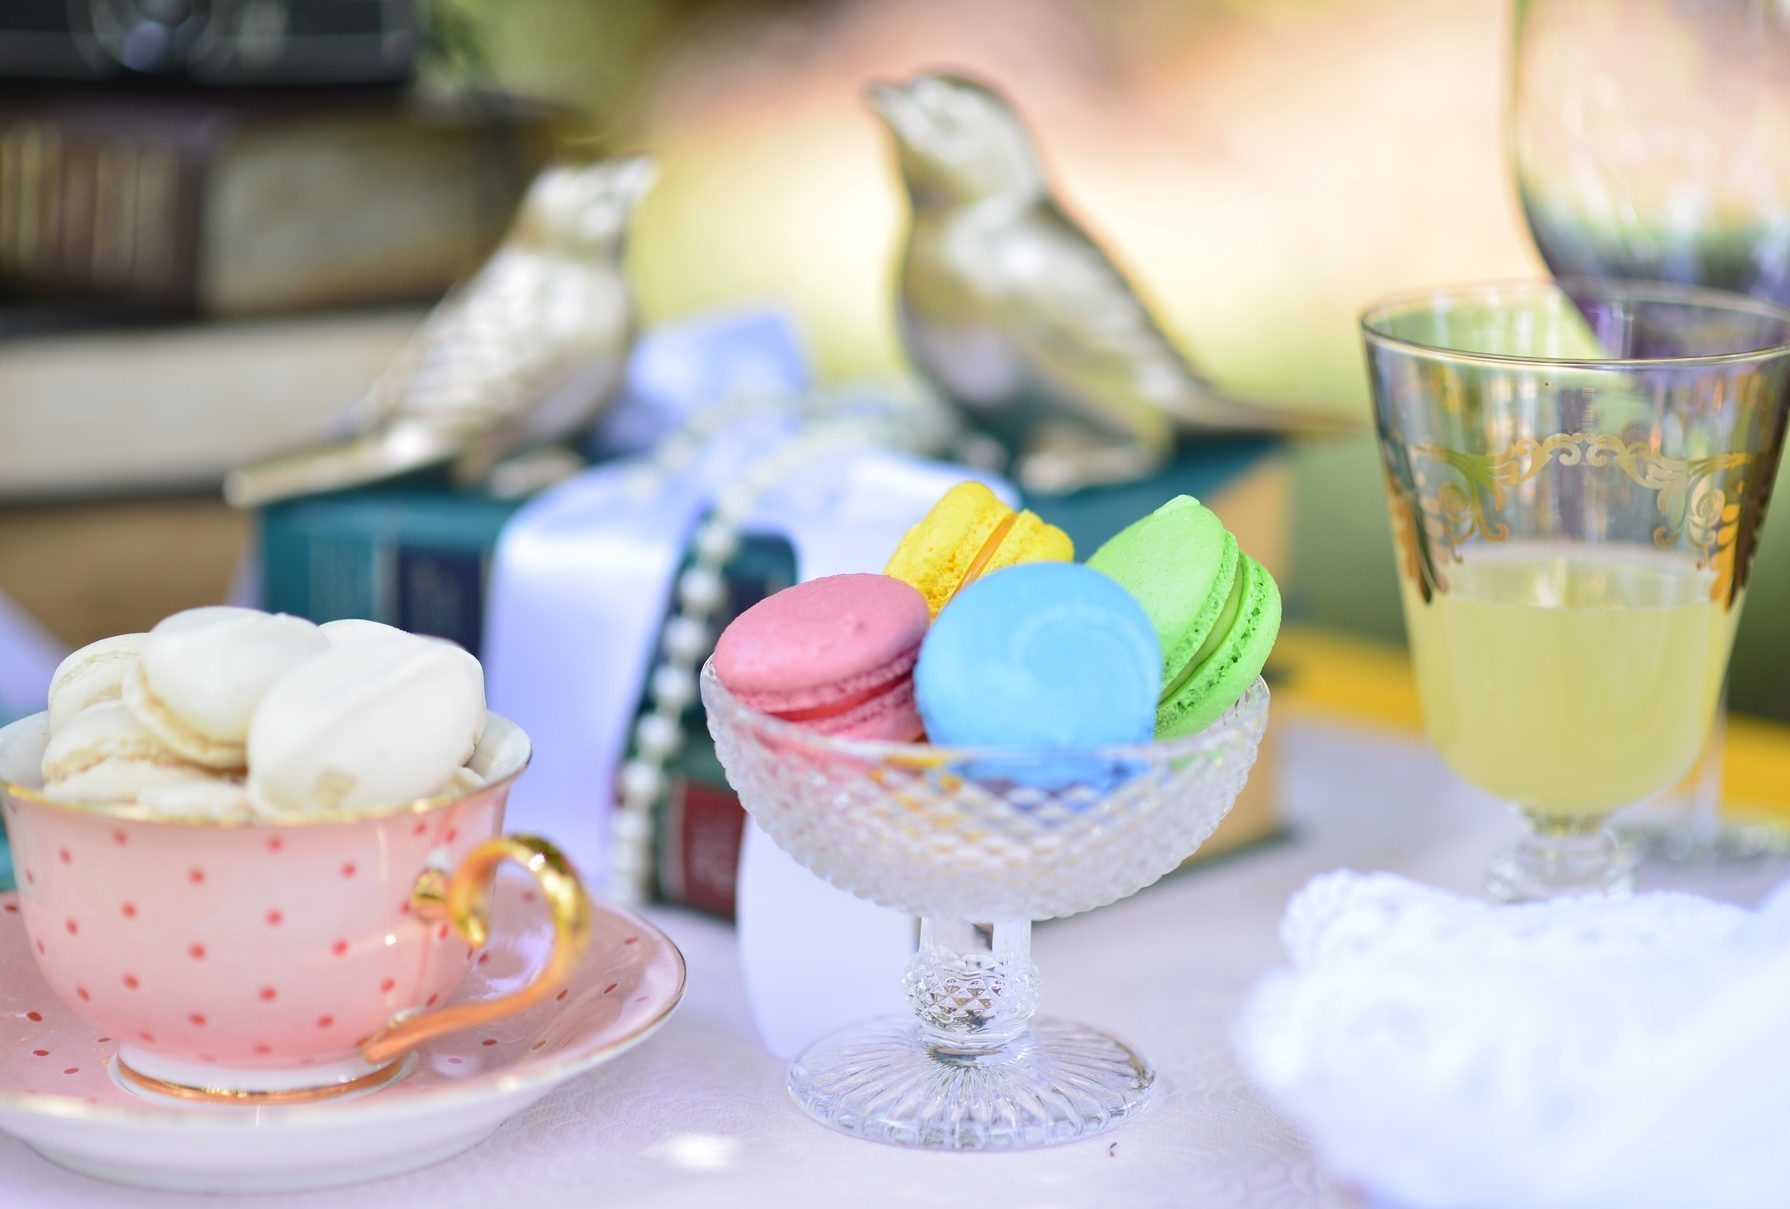 Macaroons set out at a tea party